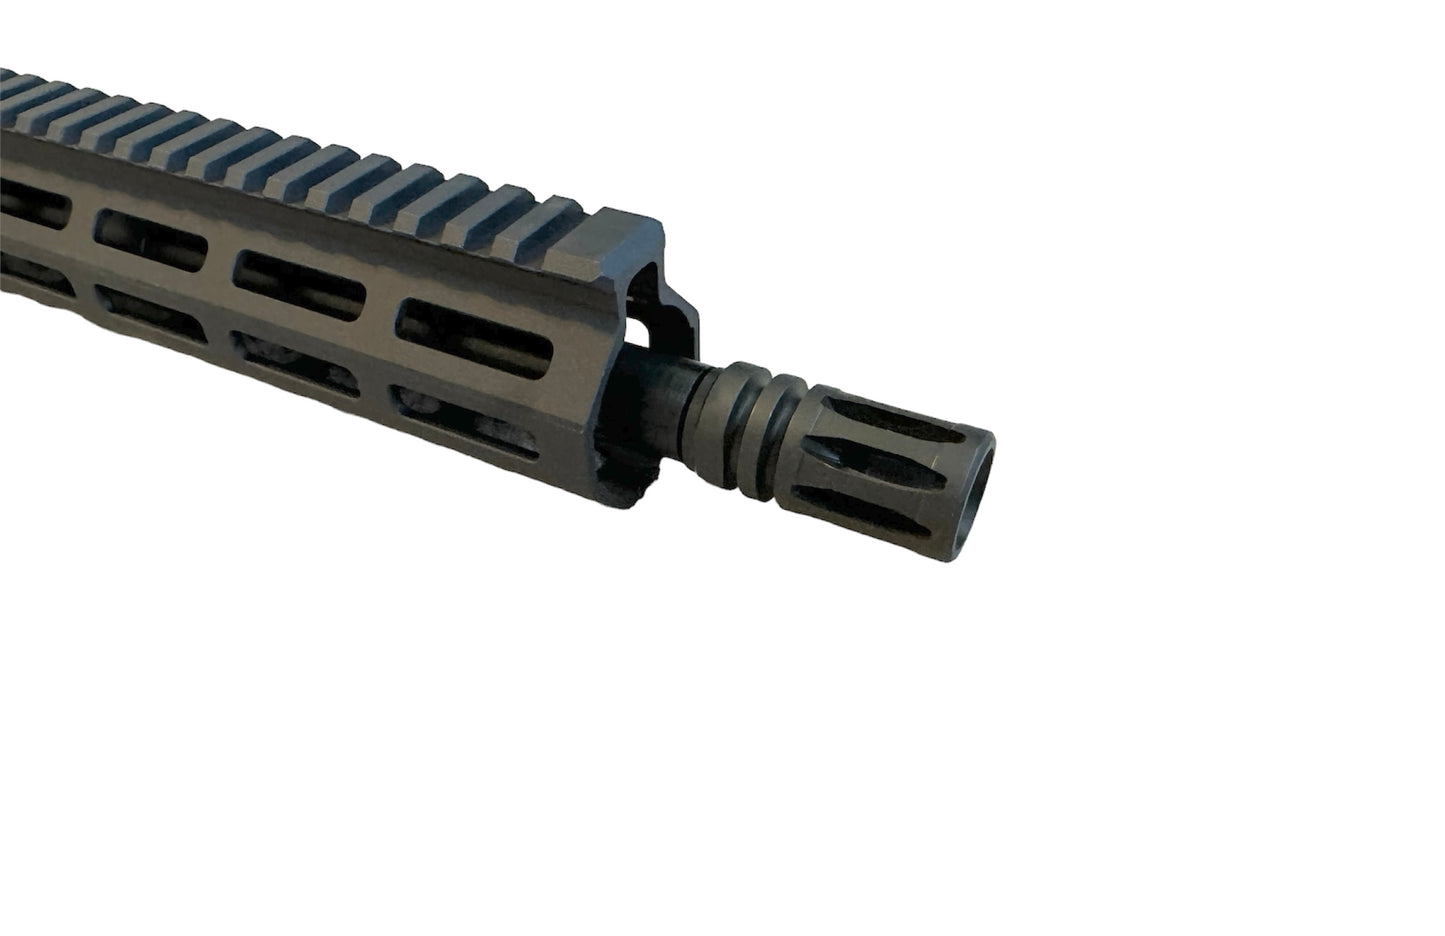 BCM Blem Upper Receiver 16″ 5.56 NATO Mid-Length 1:7 Twist Government Profile with BKF MLOK Rail